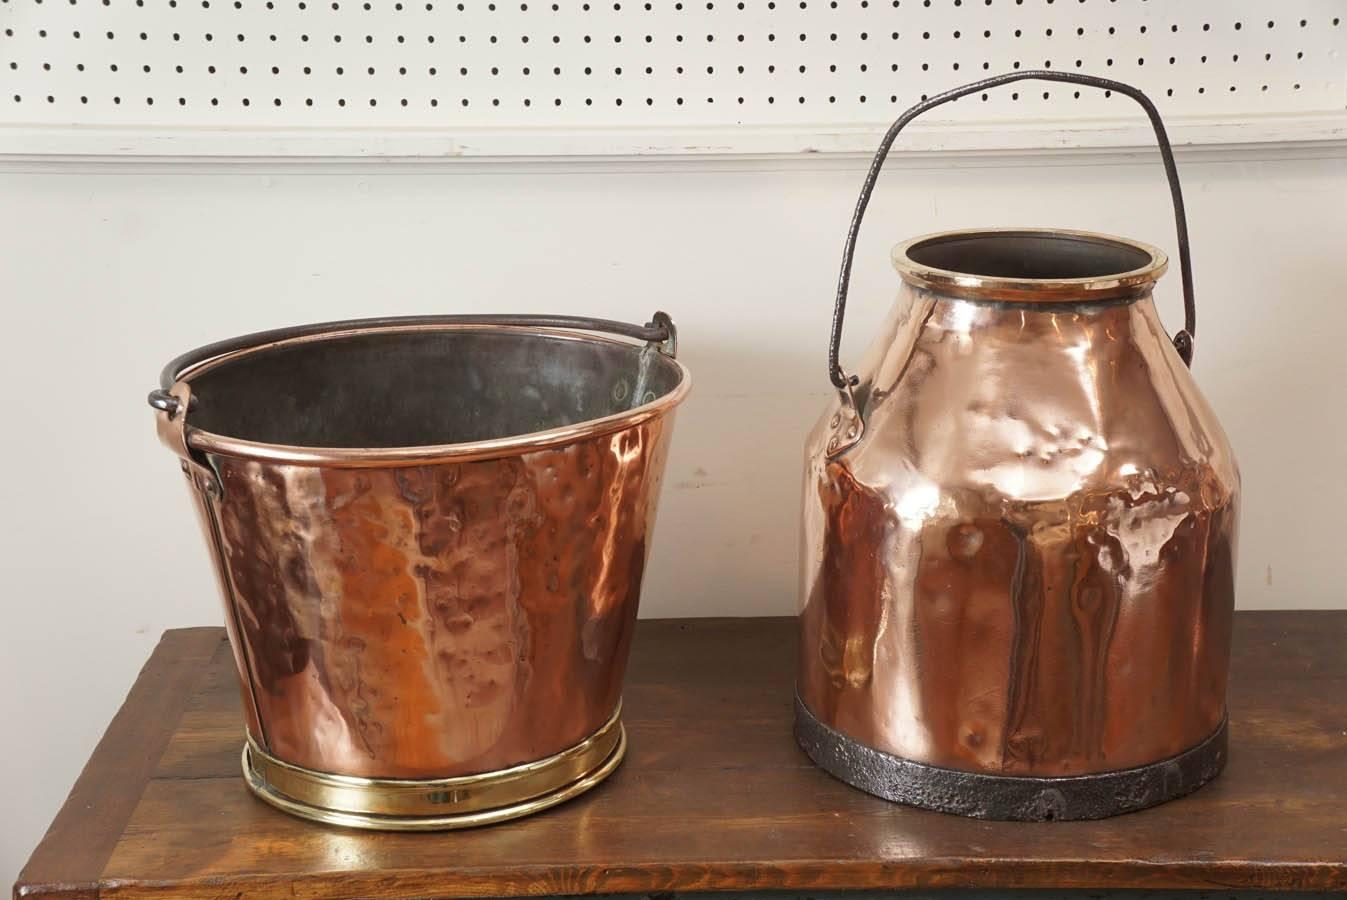 These two pieces are part of a larger collection of copper at painted porch. The milk pail on the right is unique and has great wear and the flower pot on the left with a brass rim on the bottom is stunning. Both are terrific pieces. The milk pail